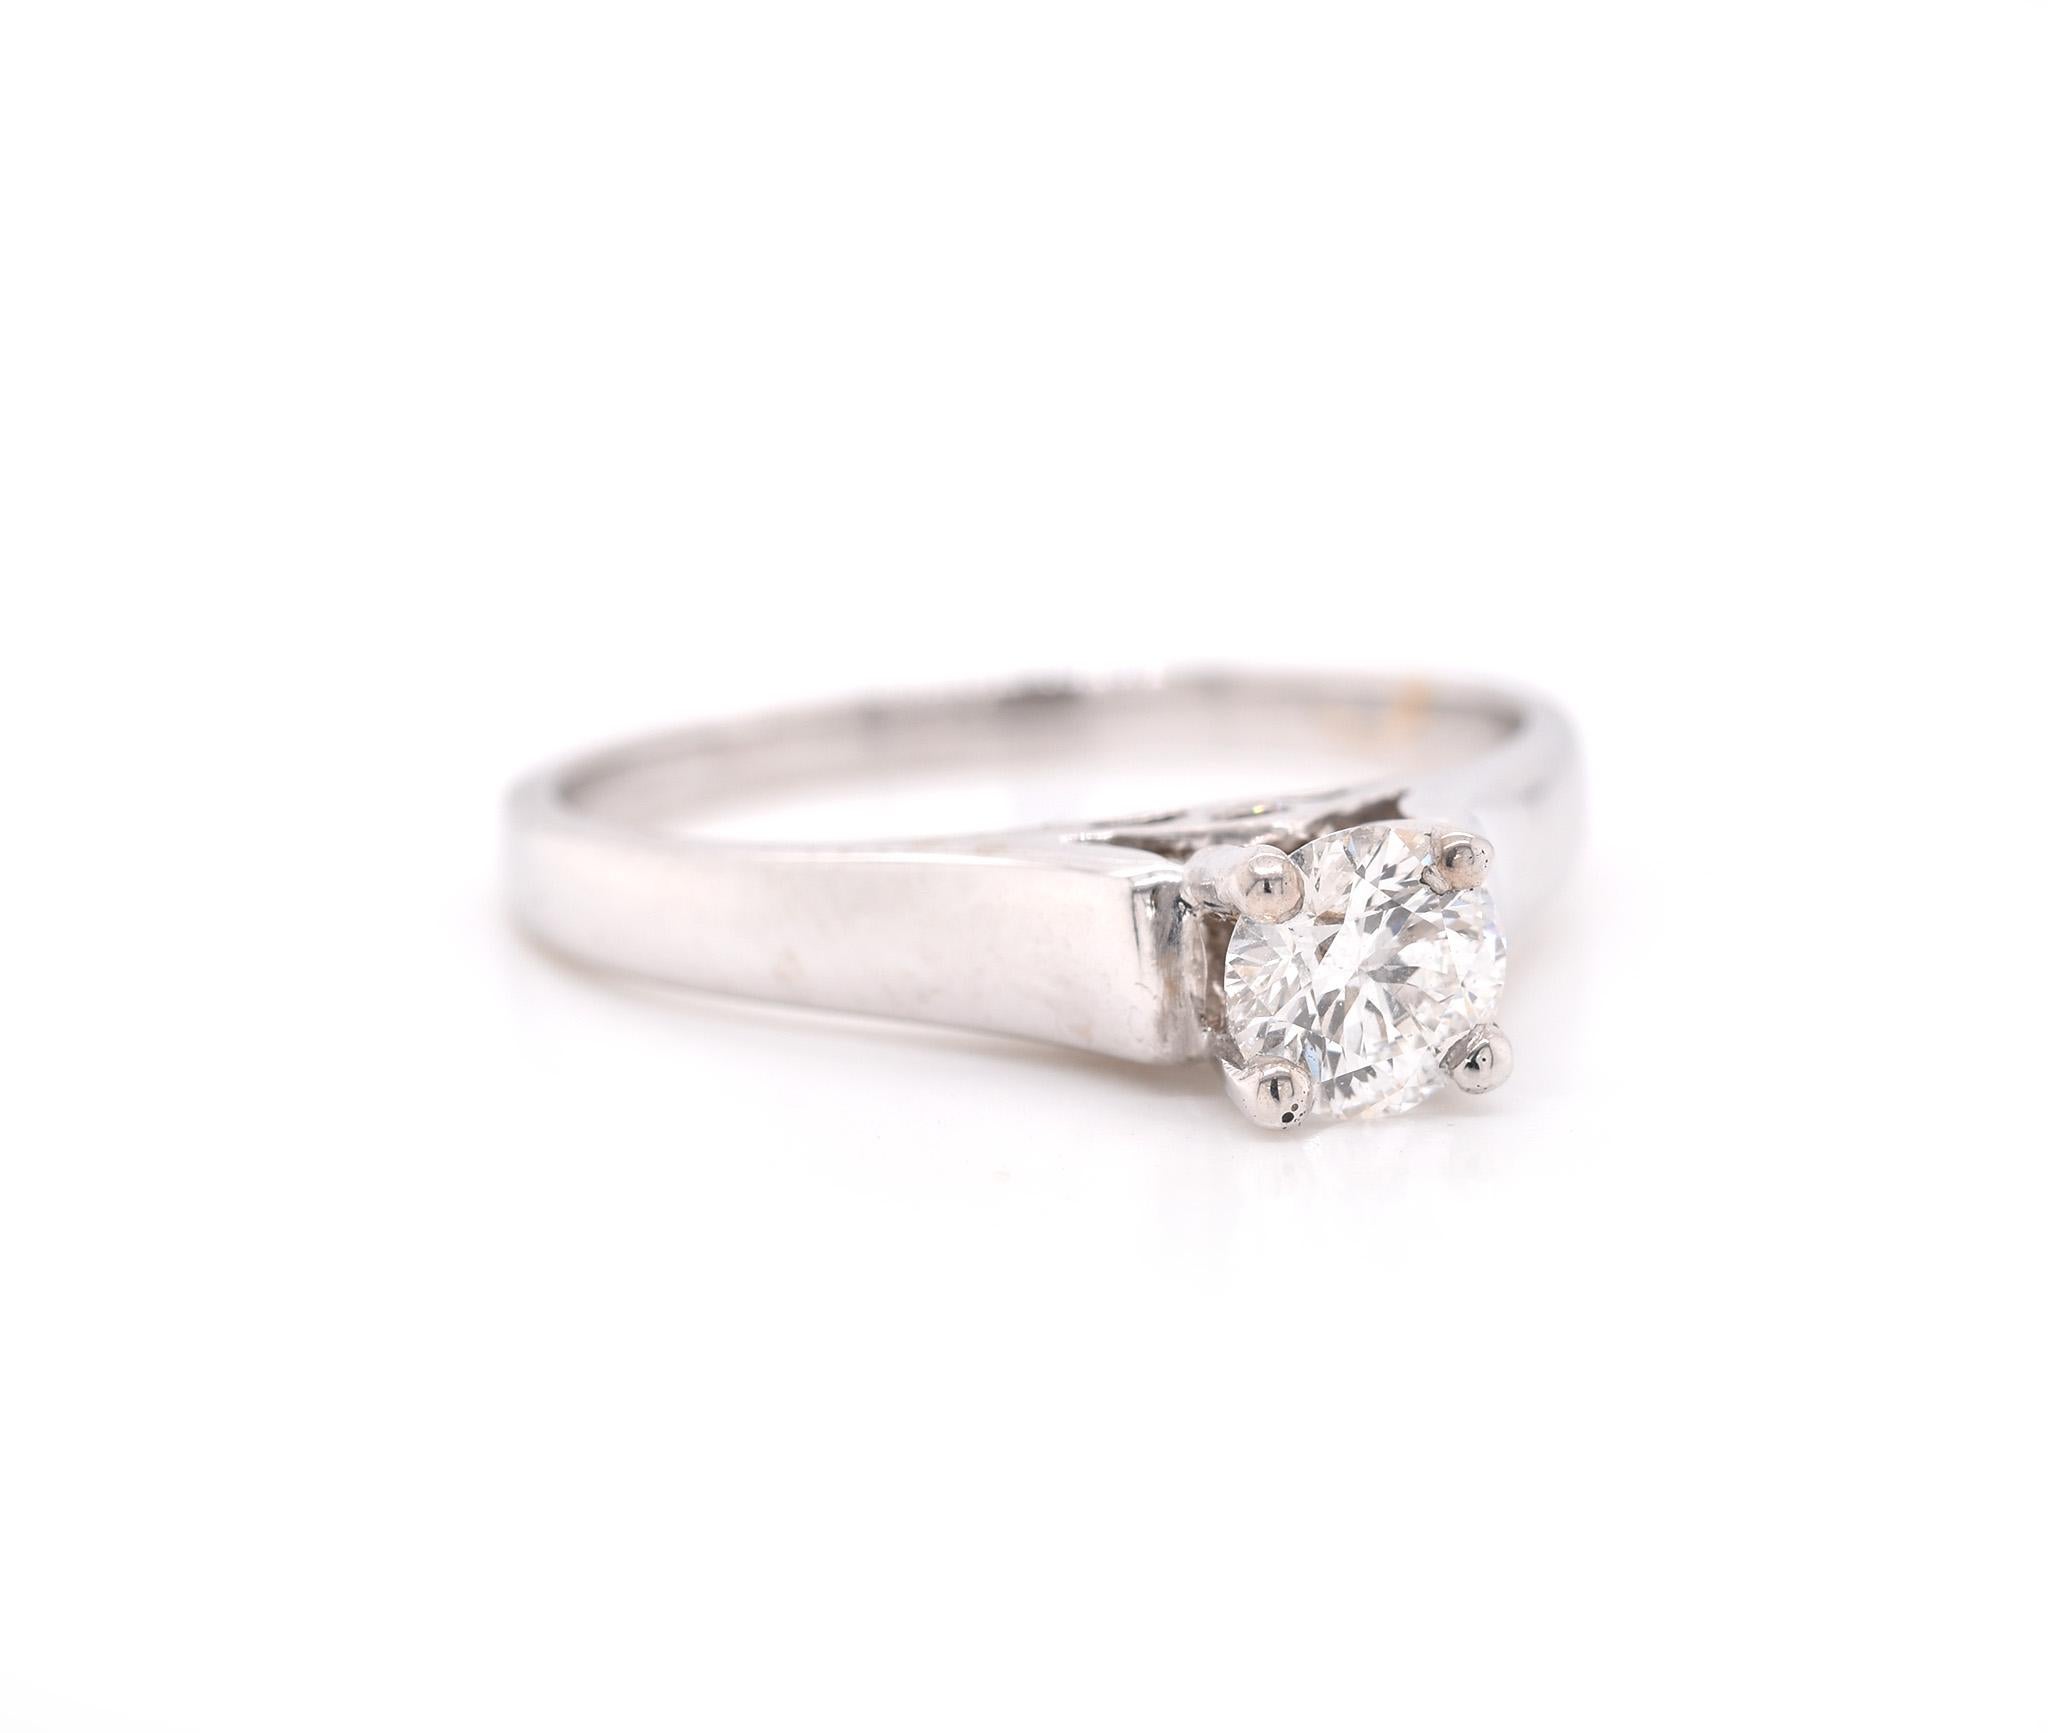 Designer: custom
Material: 14k white gold
Center Diamond: 1 round modified brilliant = 0.50ct
Color: F-G
Clarity: SI1
Size: 8 ½  (please allow two additional shipping days for sizing requests)  
Dimensions: ring top is approximately 5.18mm by